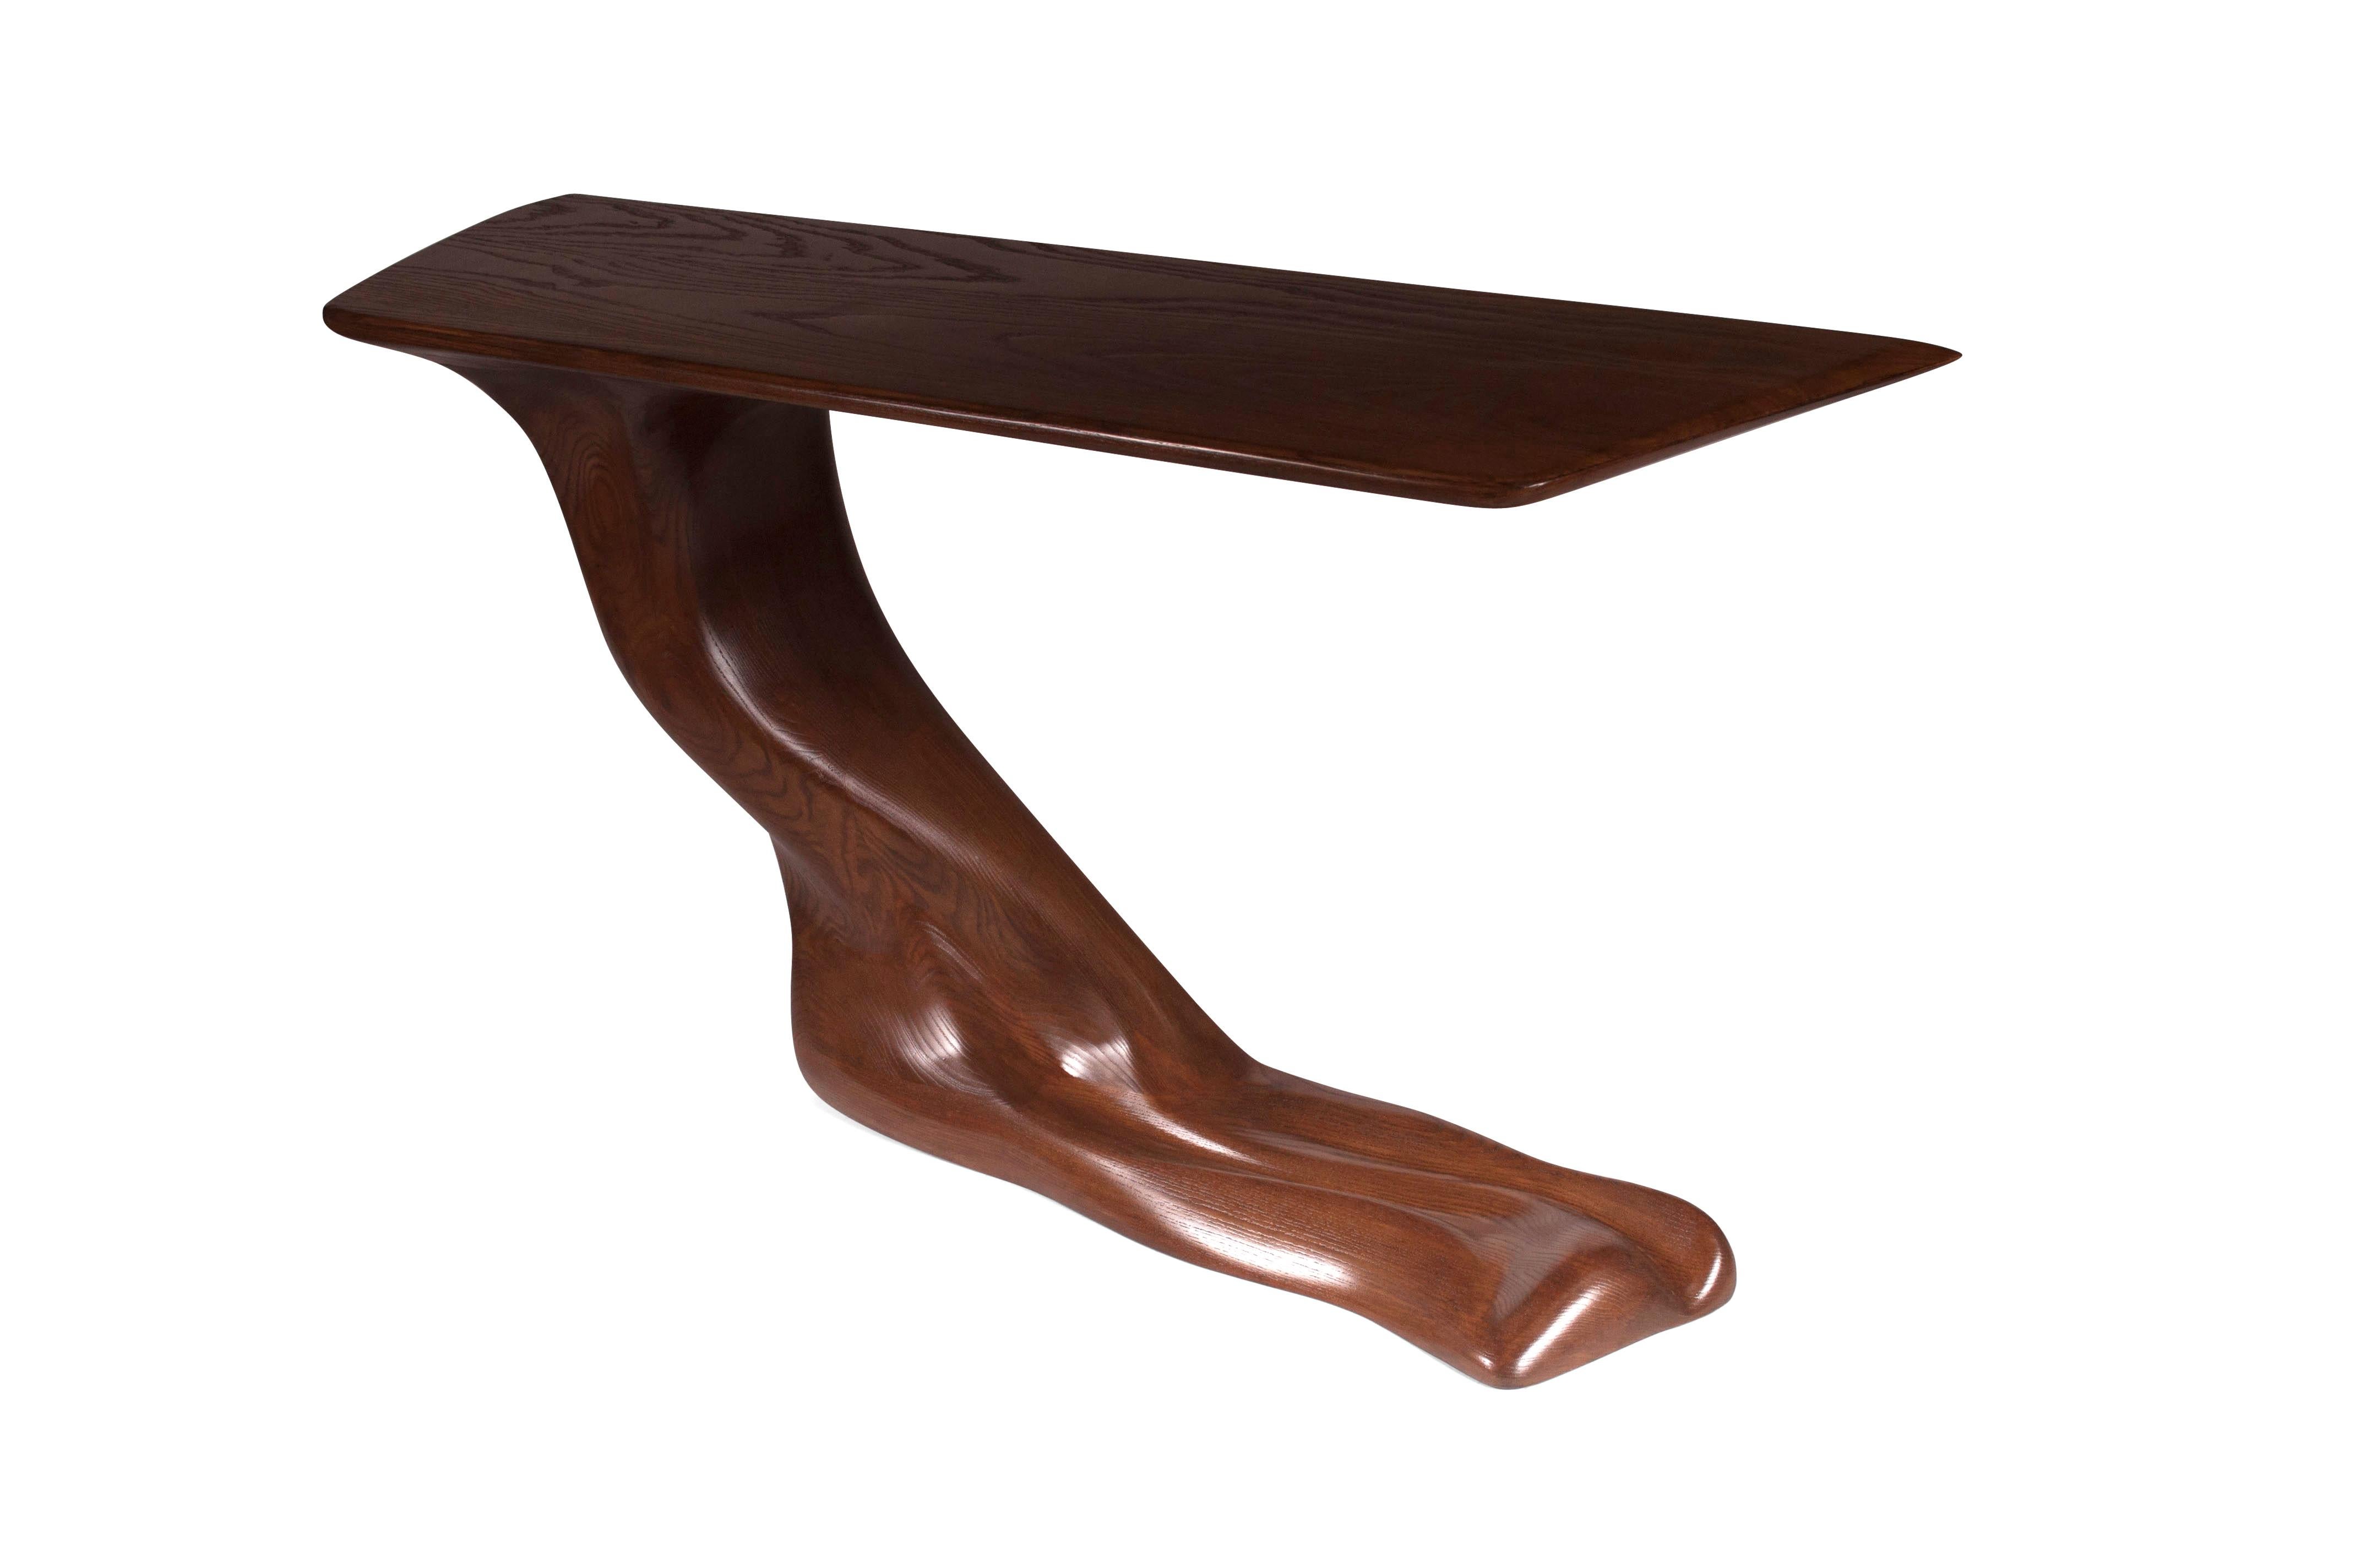 American Amorph Frolic Console Table in Walnut Stain on Ash wood with base For Sale